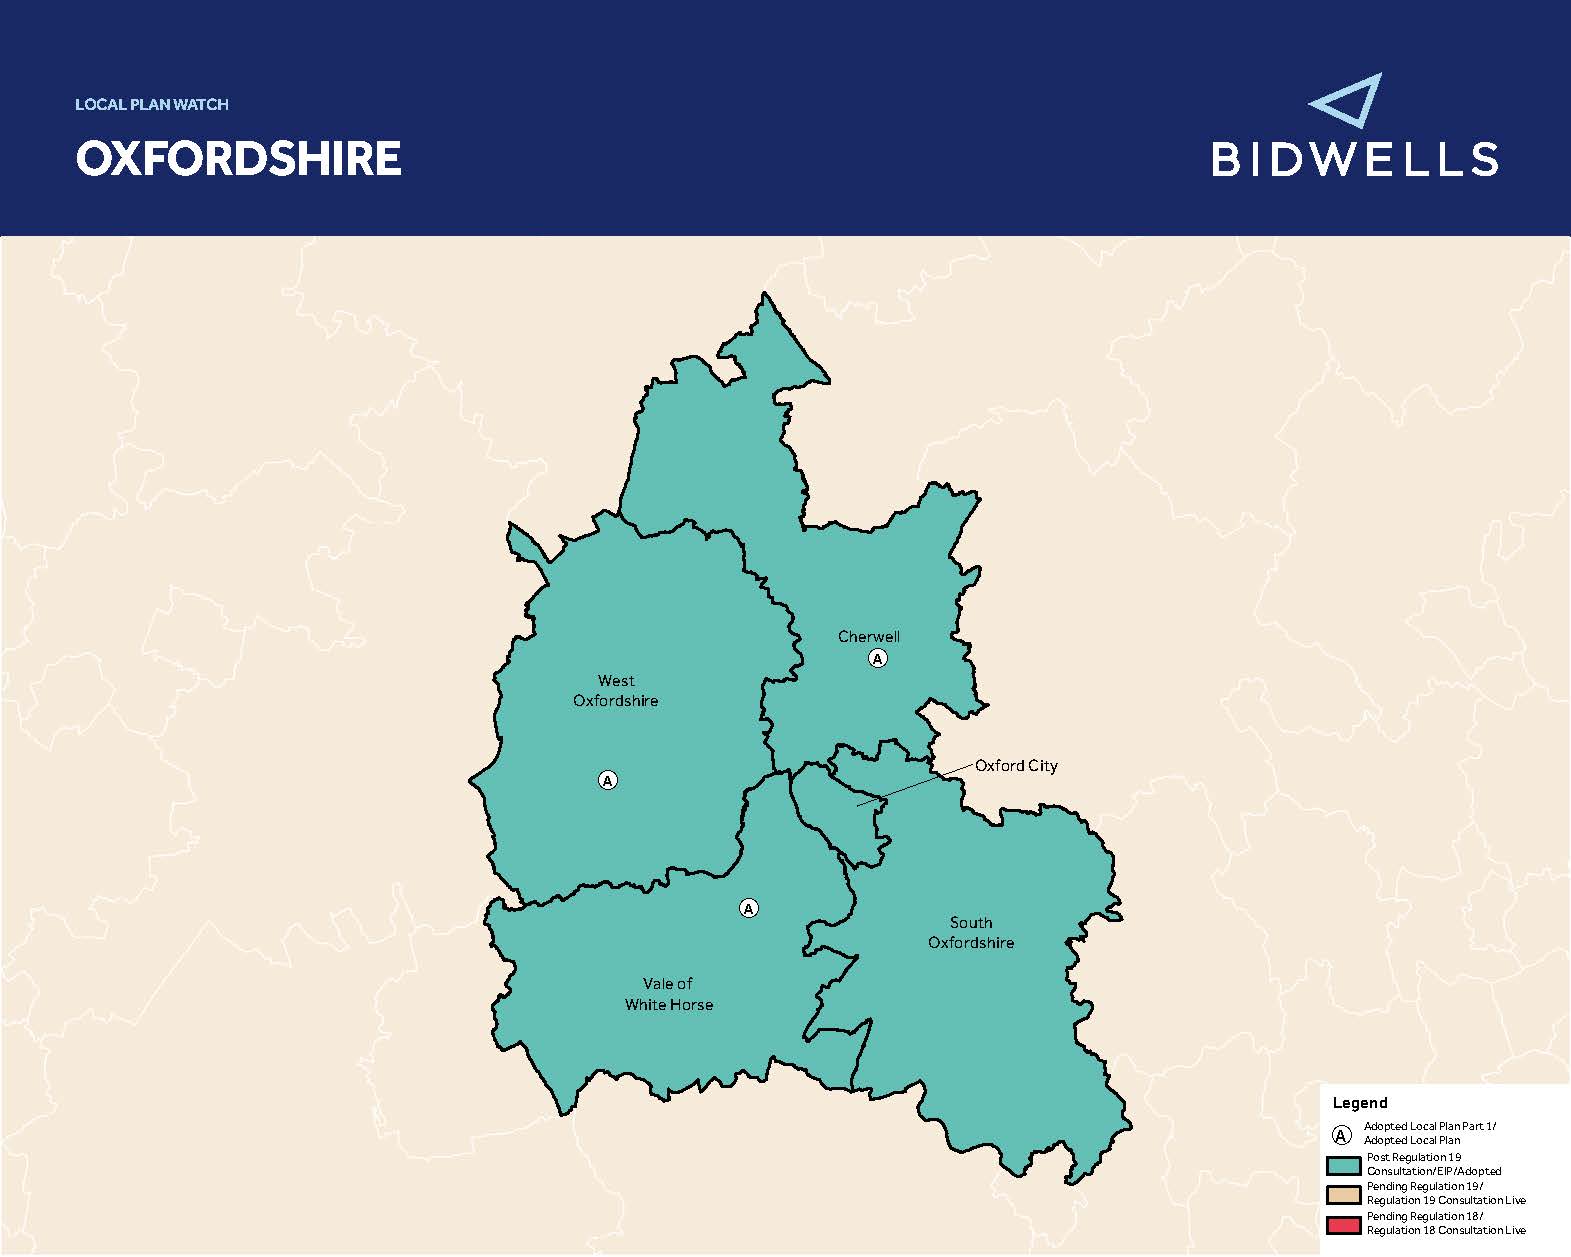 Oxfordshire Local Plan Watch - Spring 2020